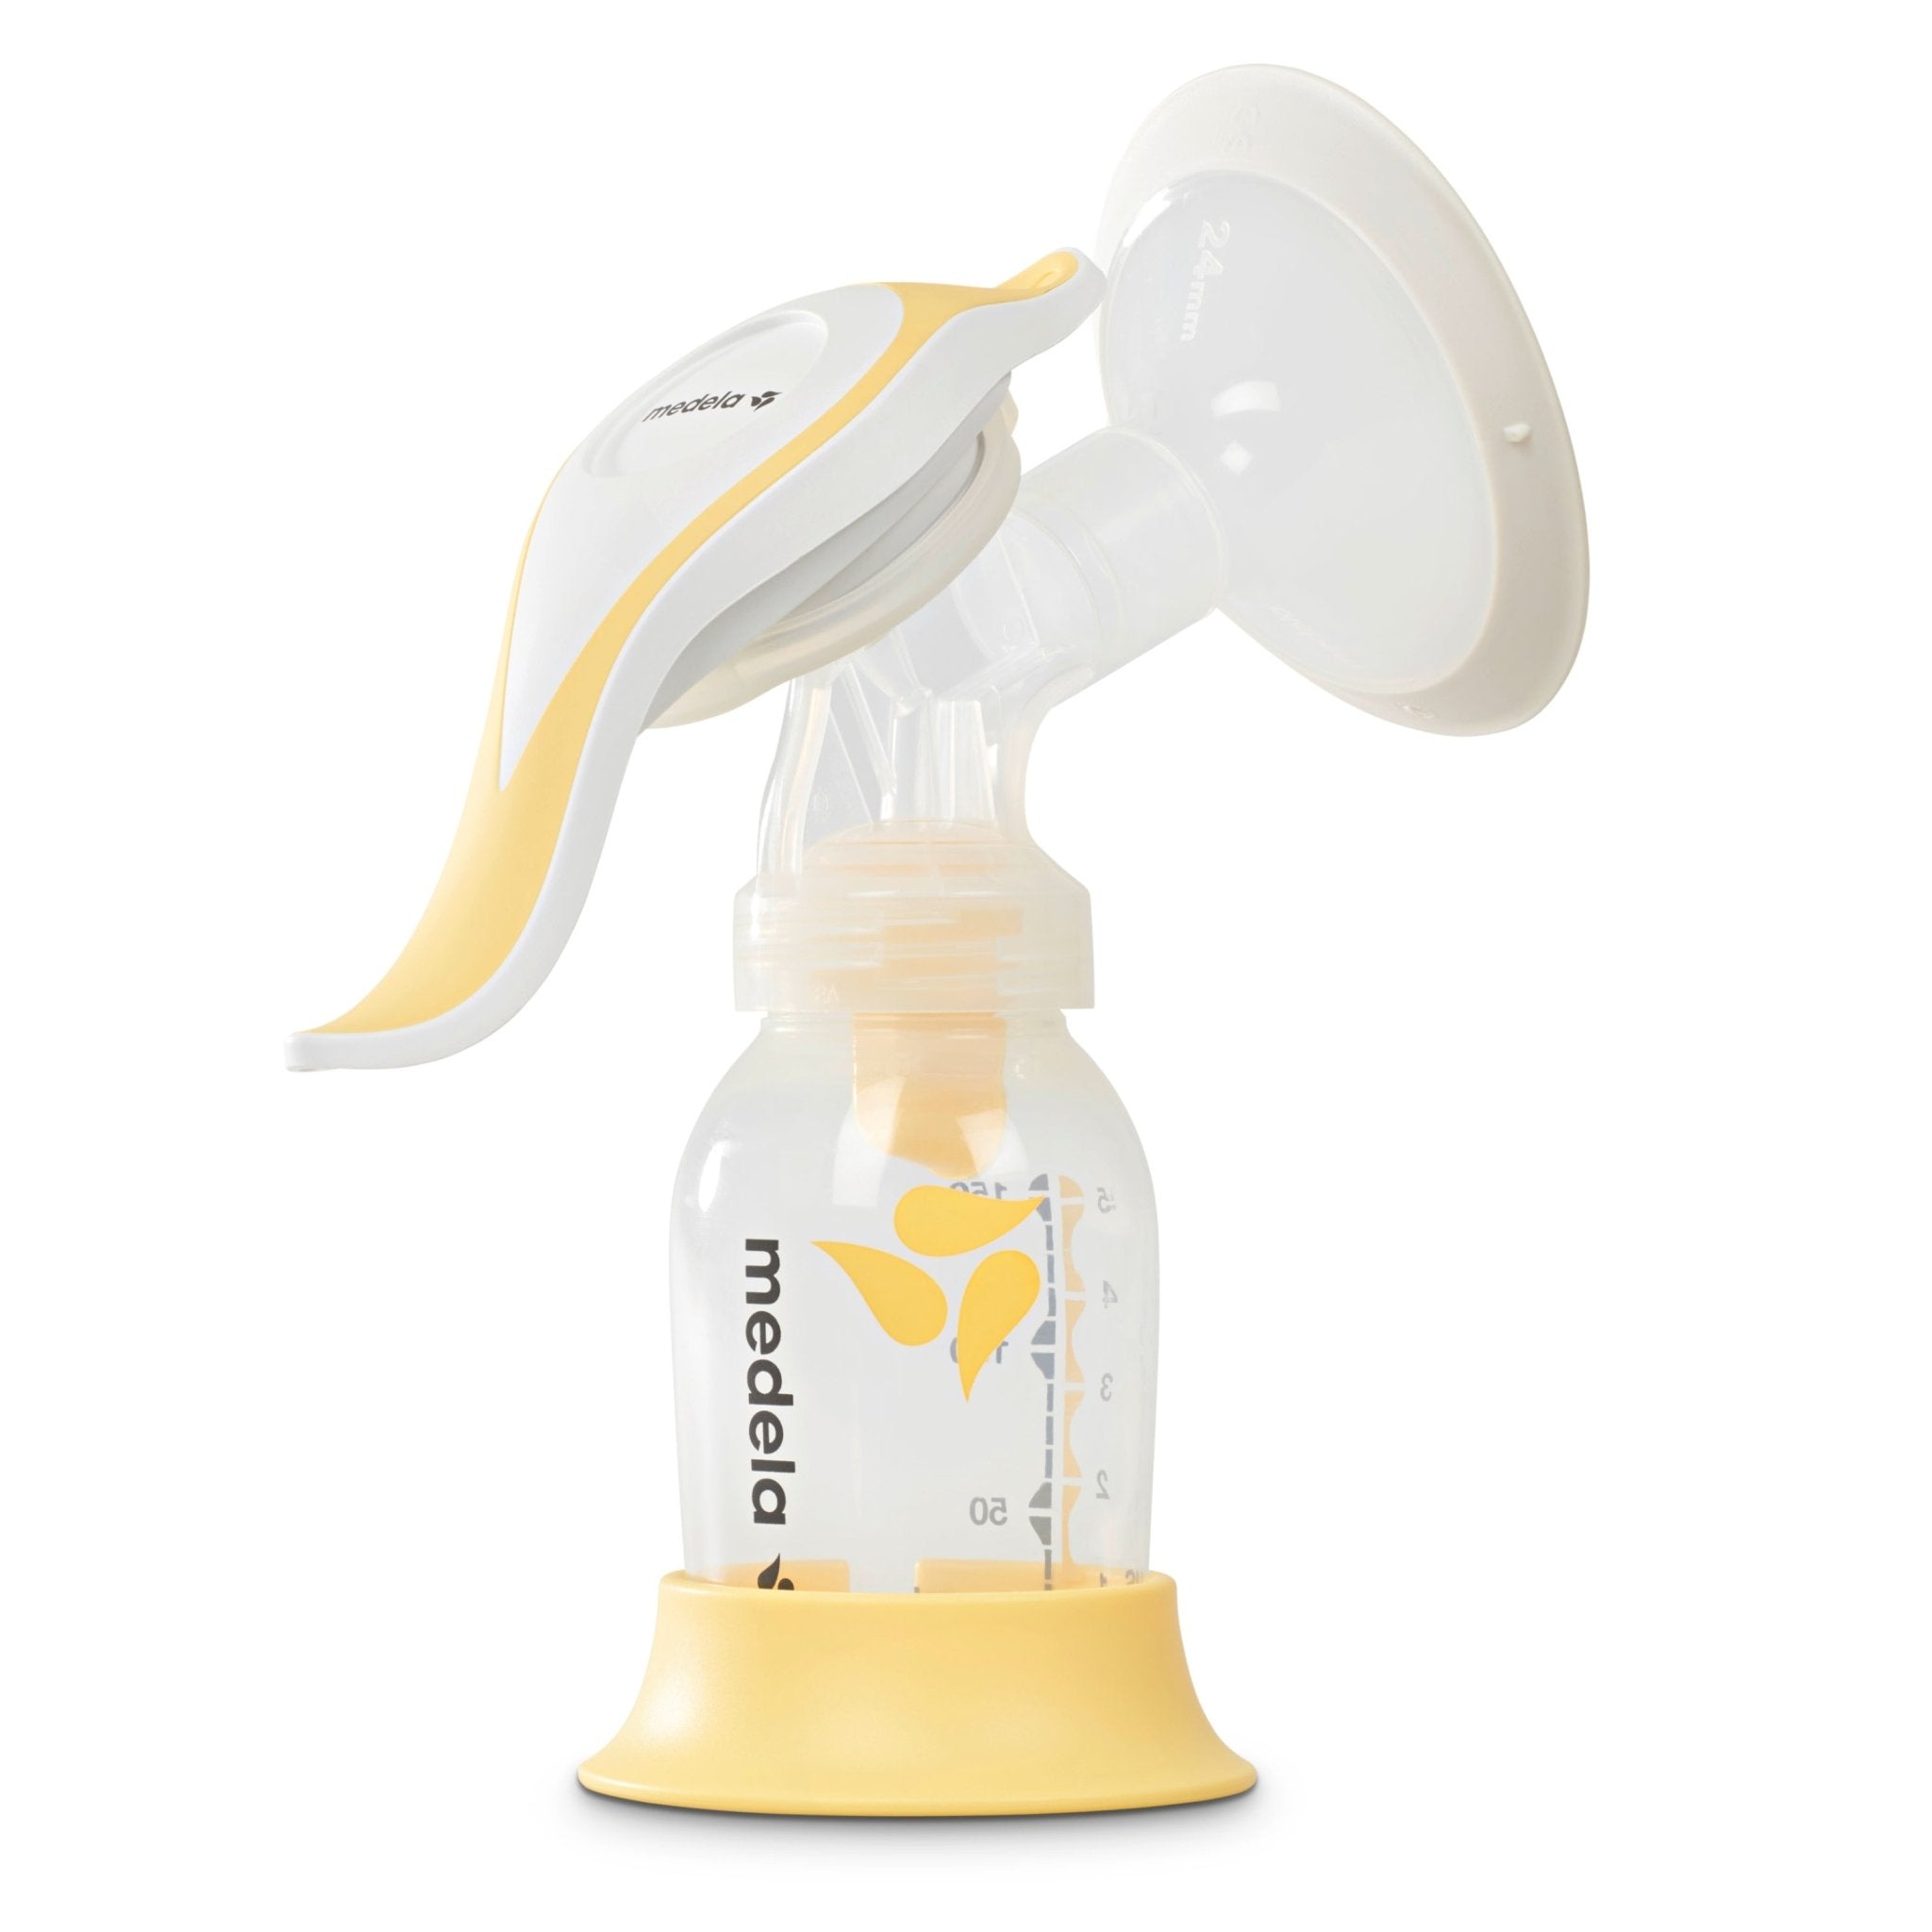 Harmony® Breast Pump with PersonalFit Flex™, -- ANB Baby